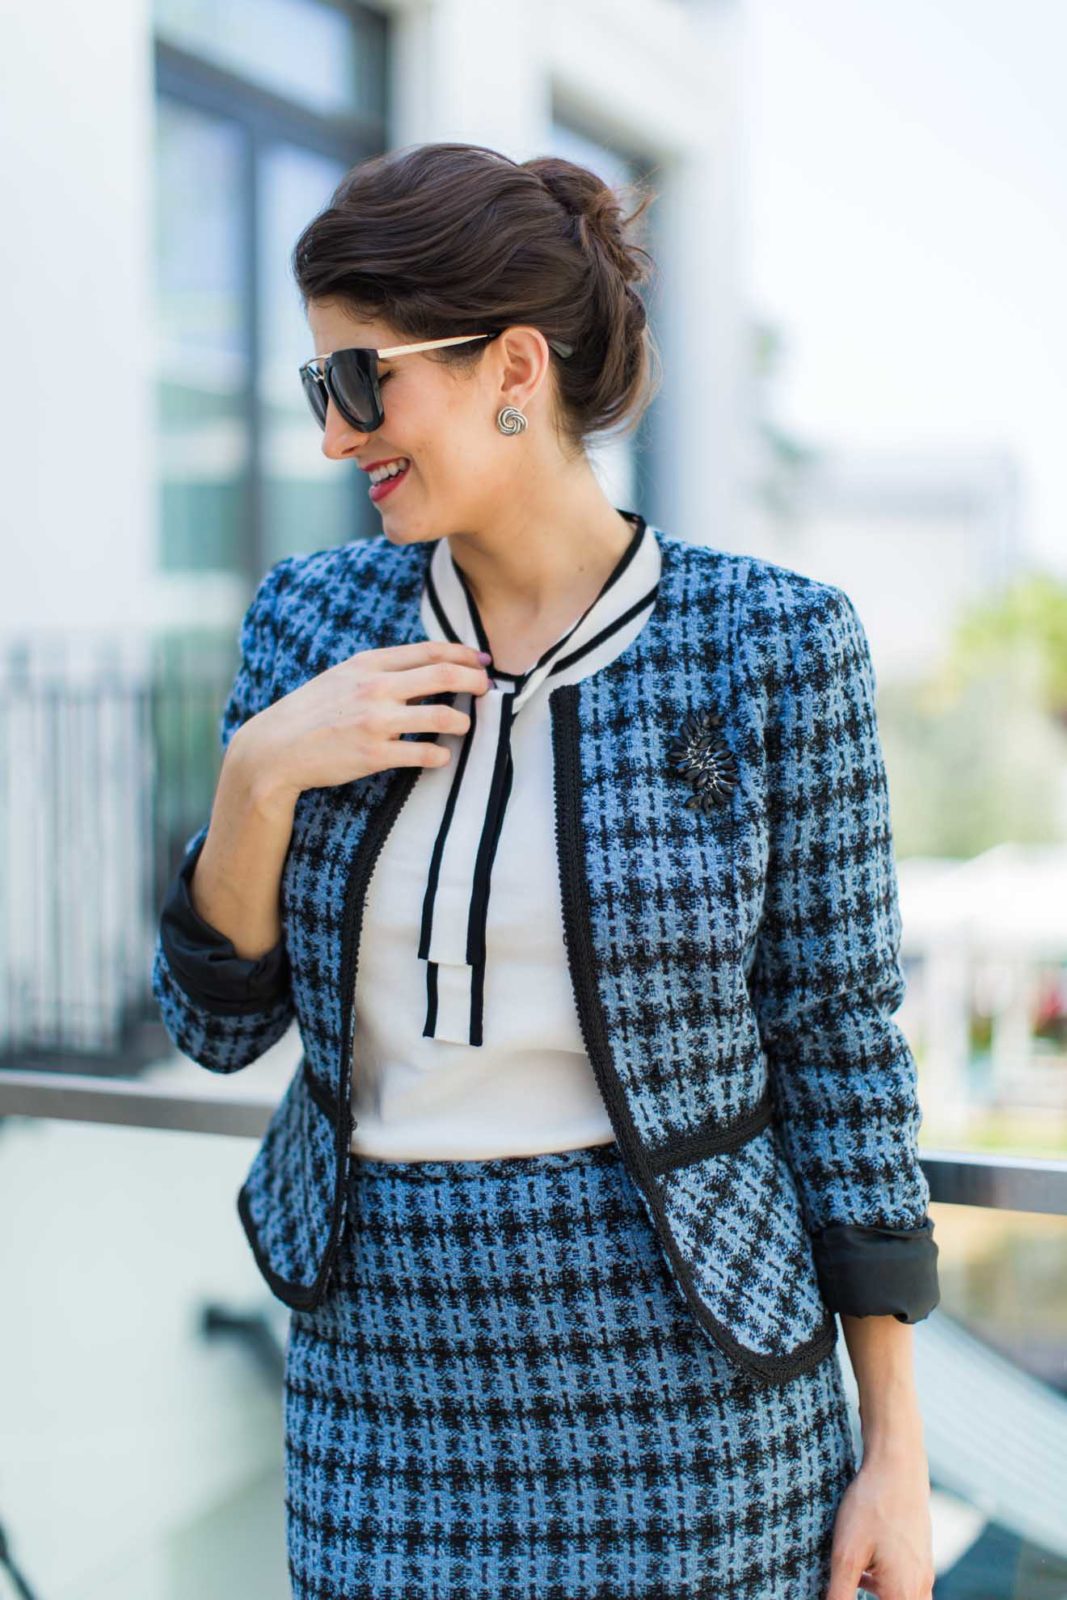 Laura Lily Fashion Travel and Lifestyle Blog, Tahari ASL Classic Blue Bouclé Suit, Coco Chanel Inspired Suit,